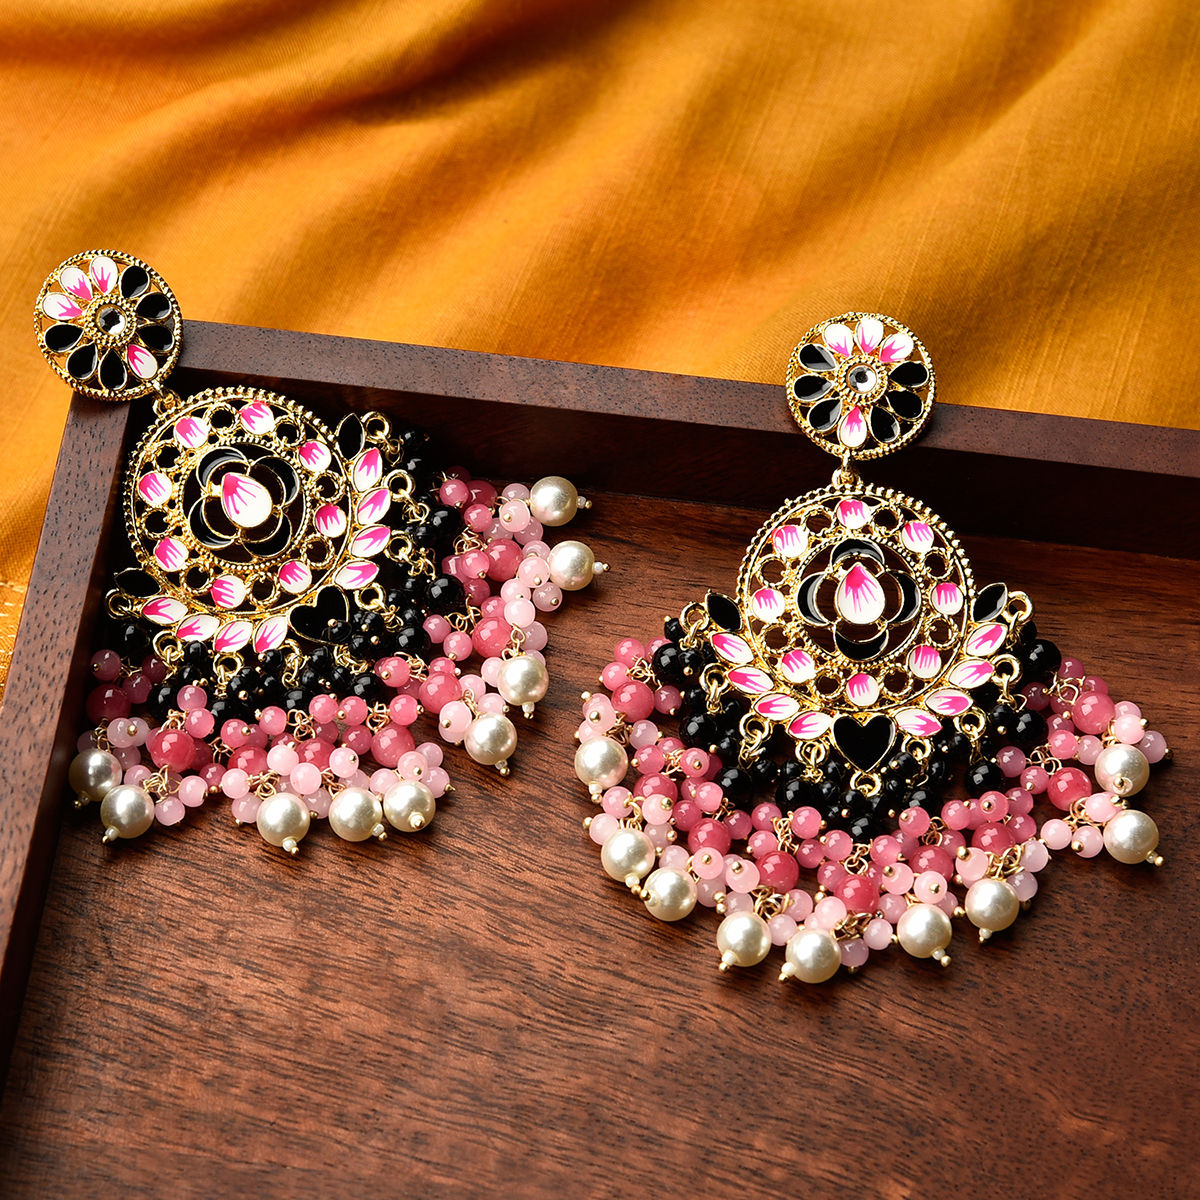 Pink Earrings for Gown on Wedding Day with Silver Tone